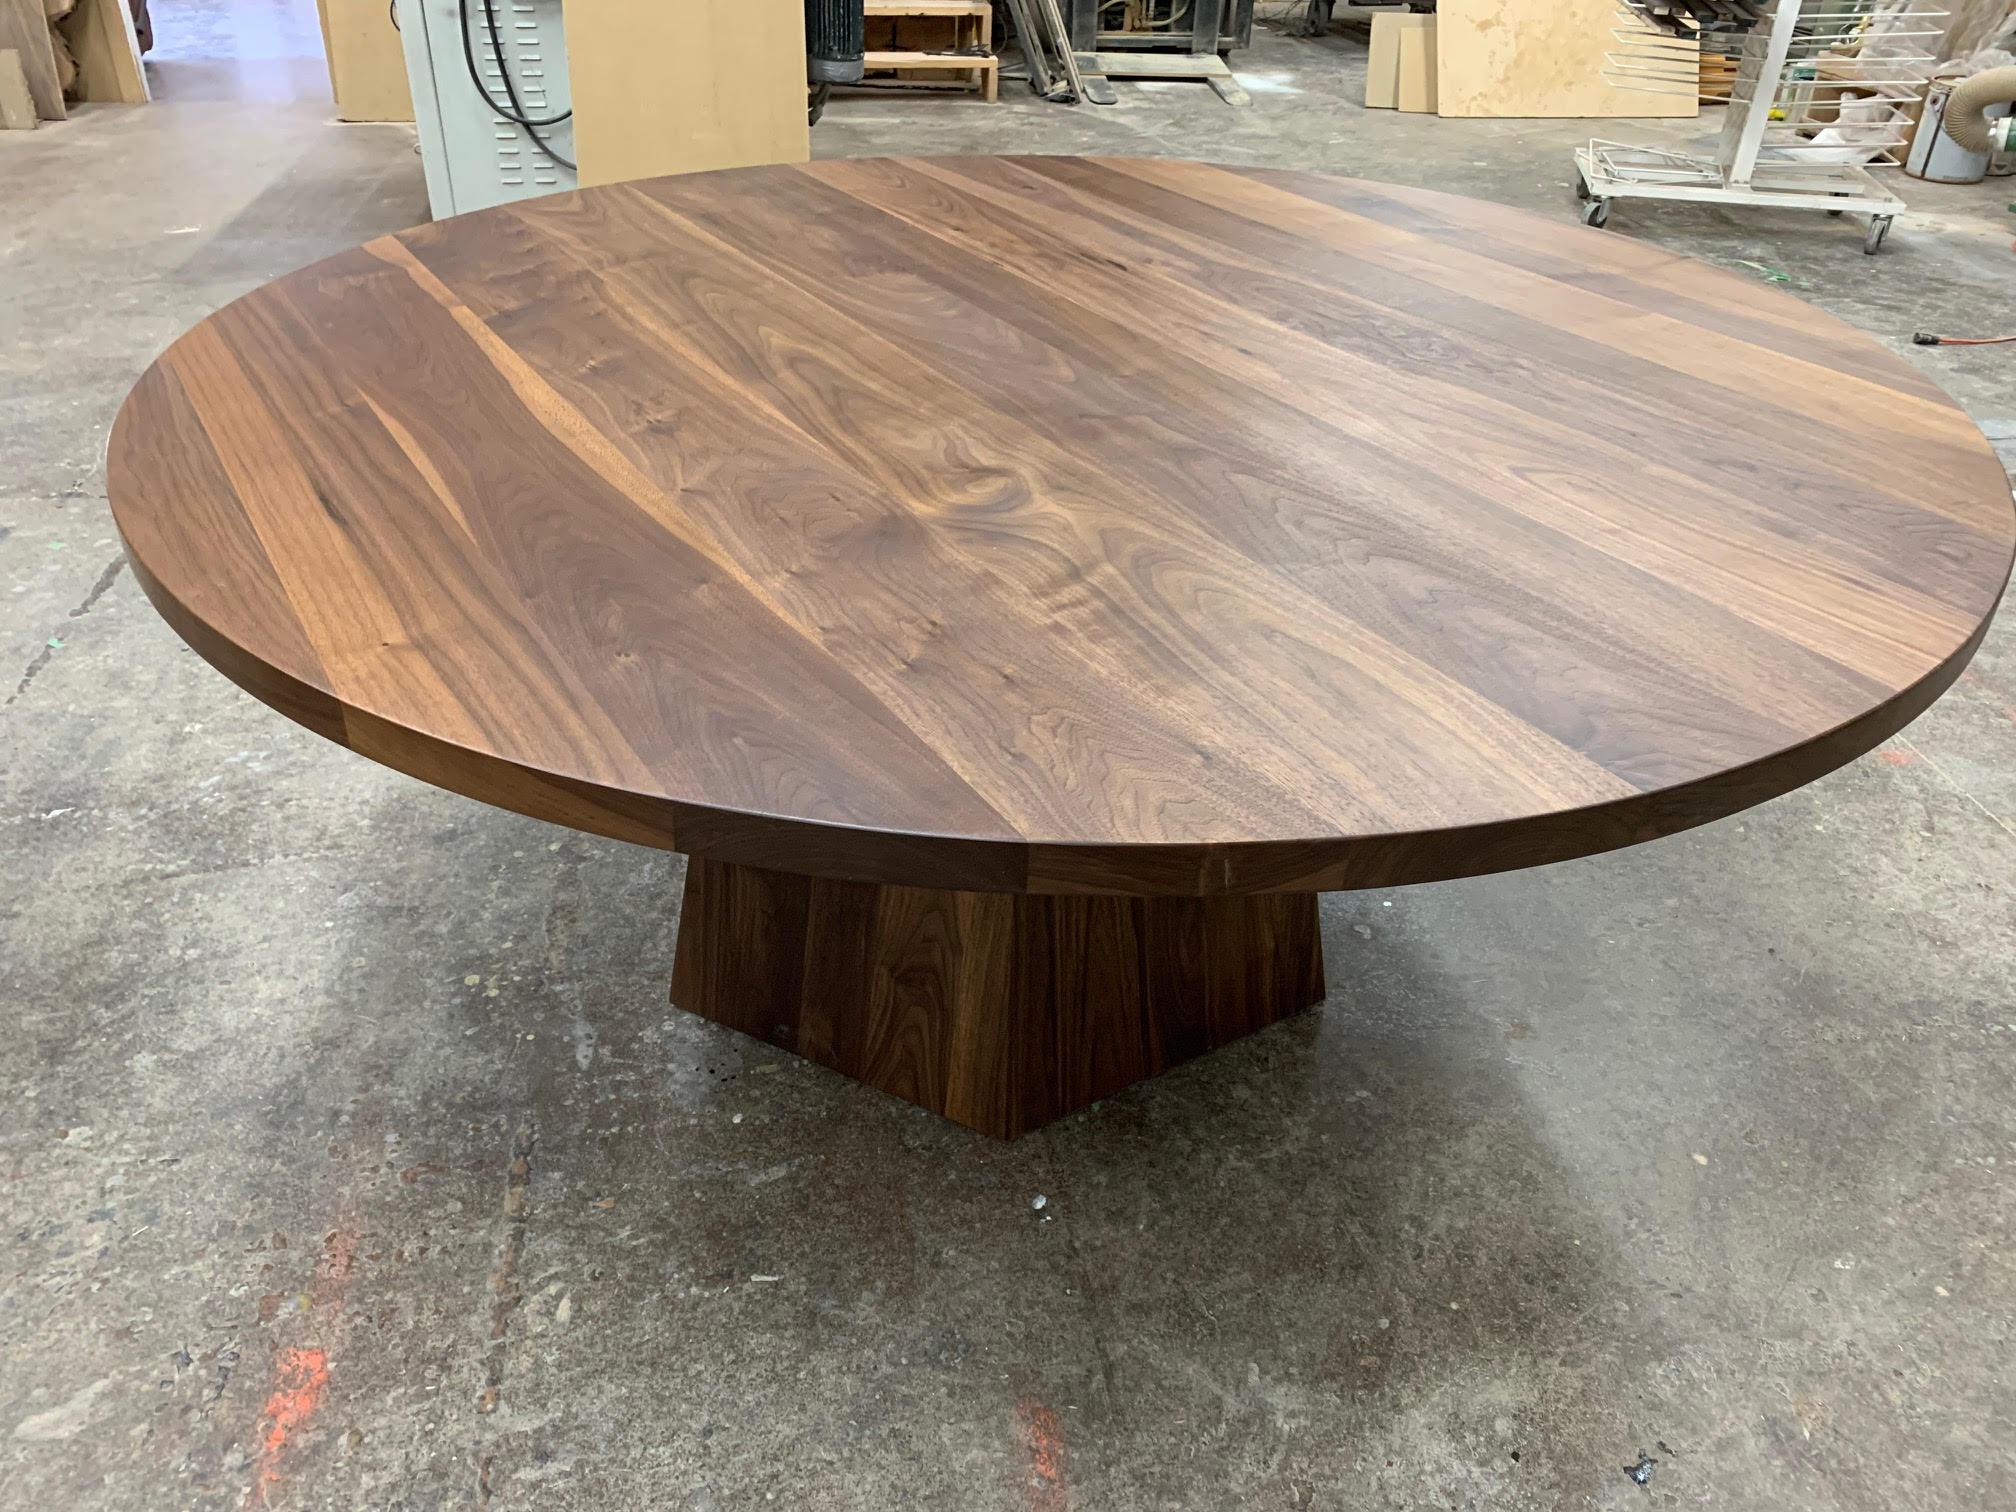 This round black walnut dining table on black walnut hexagonal base with brass is the perfect dining table. It sits comfortably 4-5 people for a 66in diameter and more depending on the size. The brass adds a note of glamour to the table. Our motto,